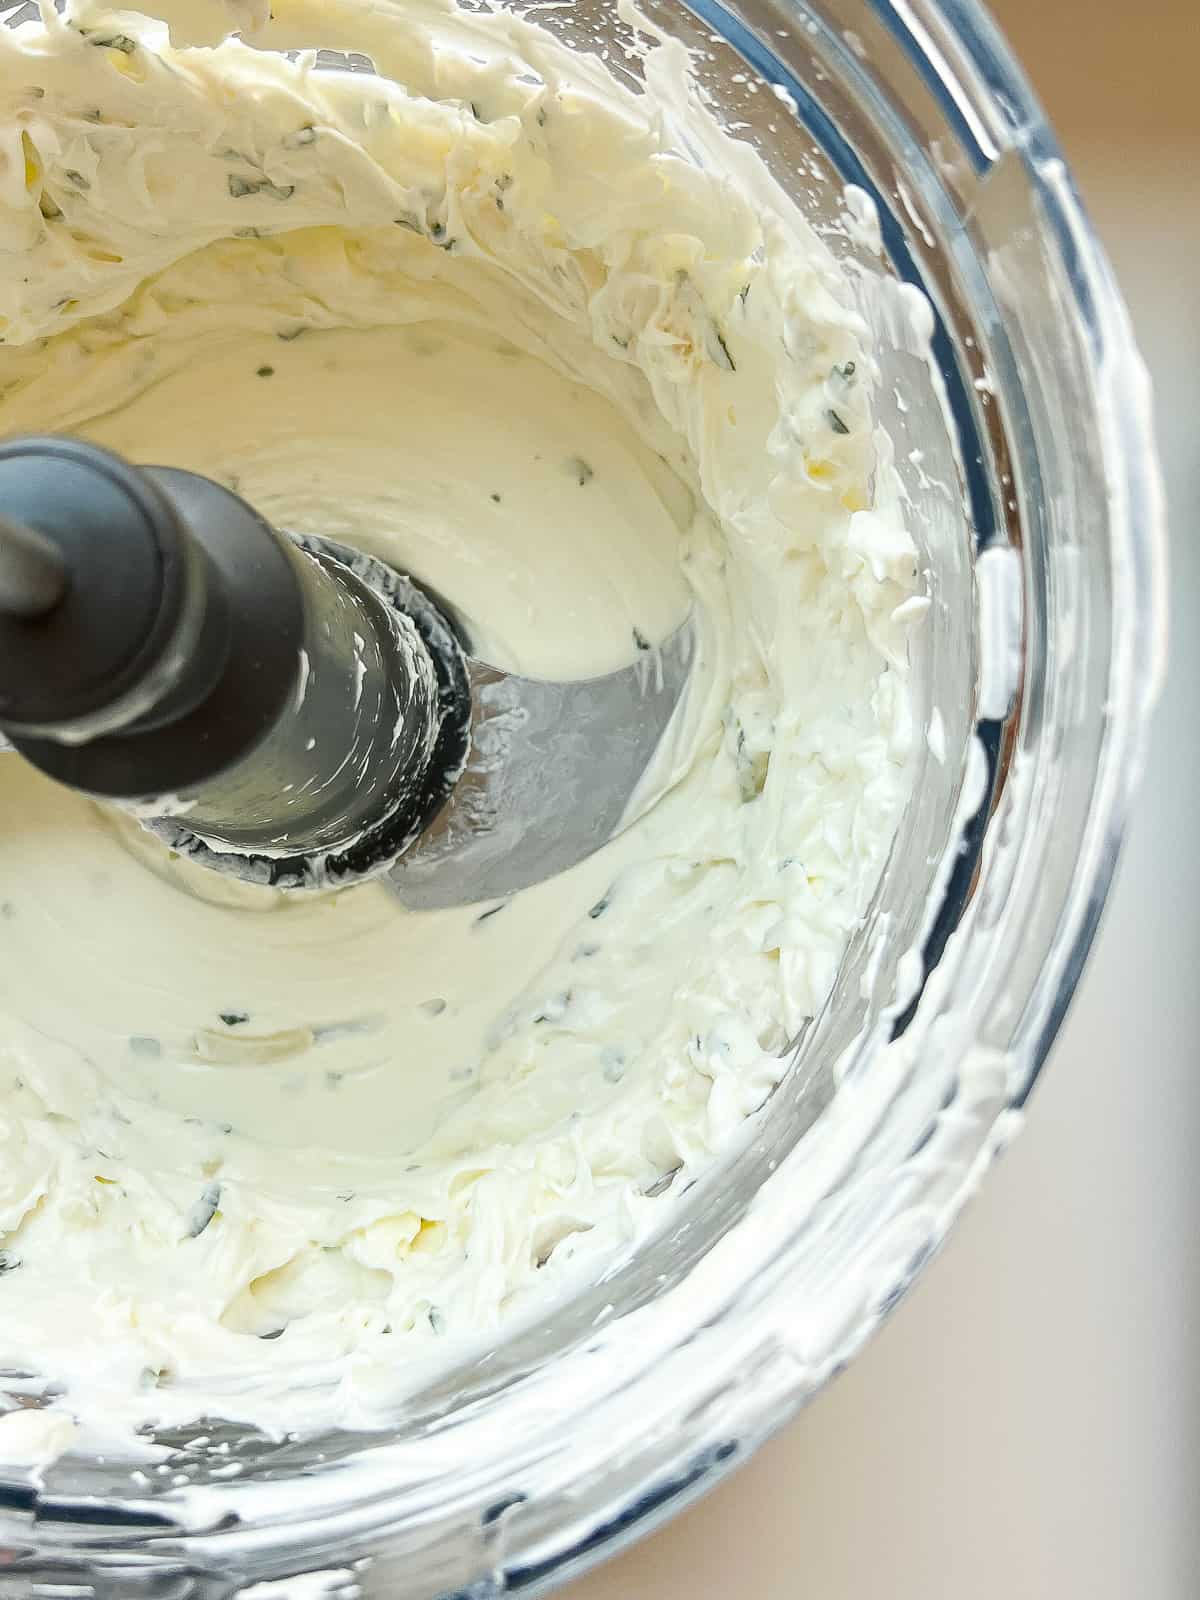 The finished labneh mixture in the bowl of a food processor.